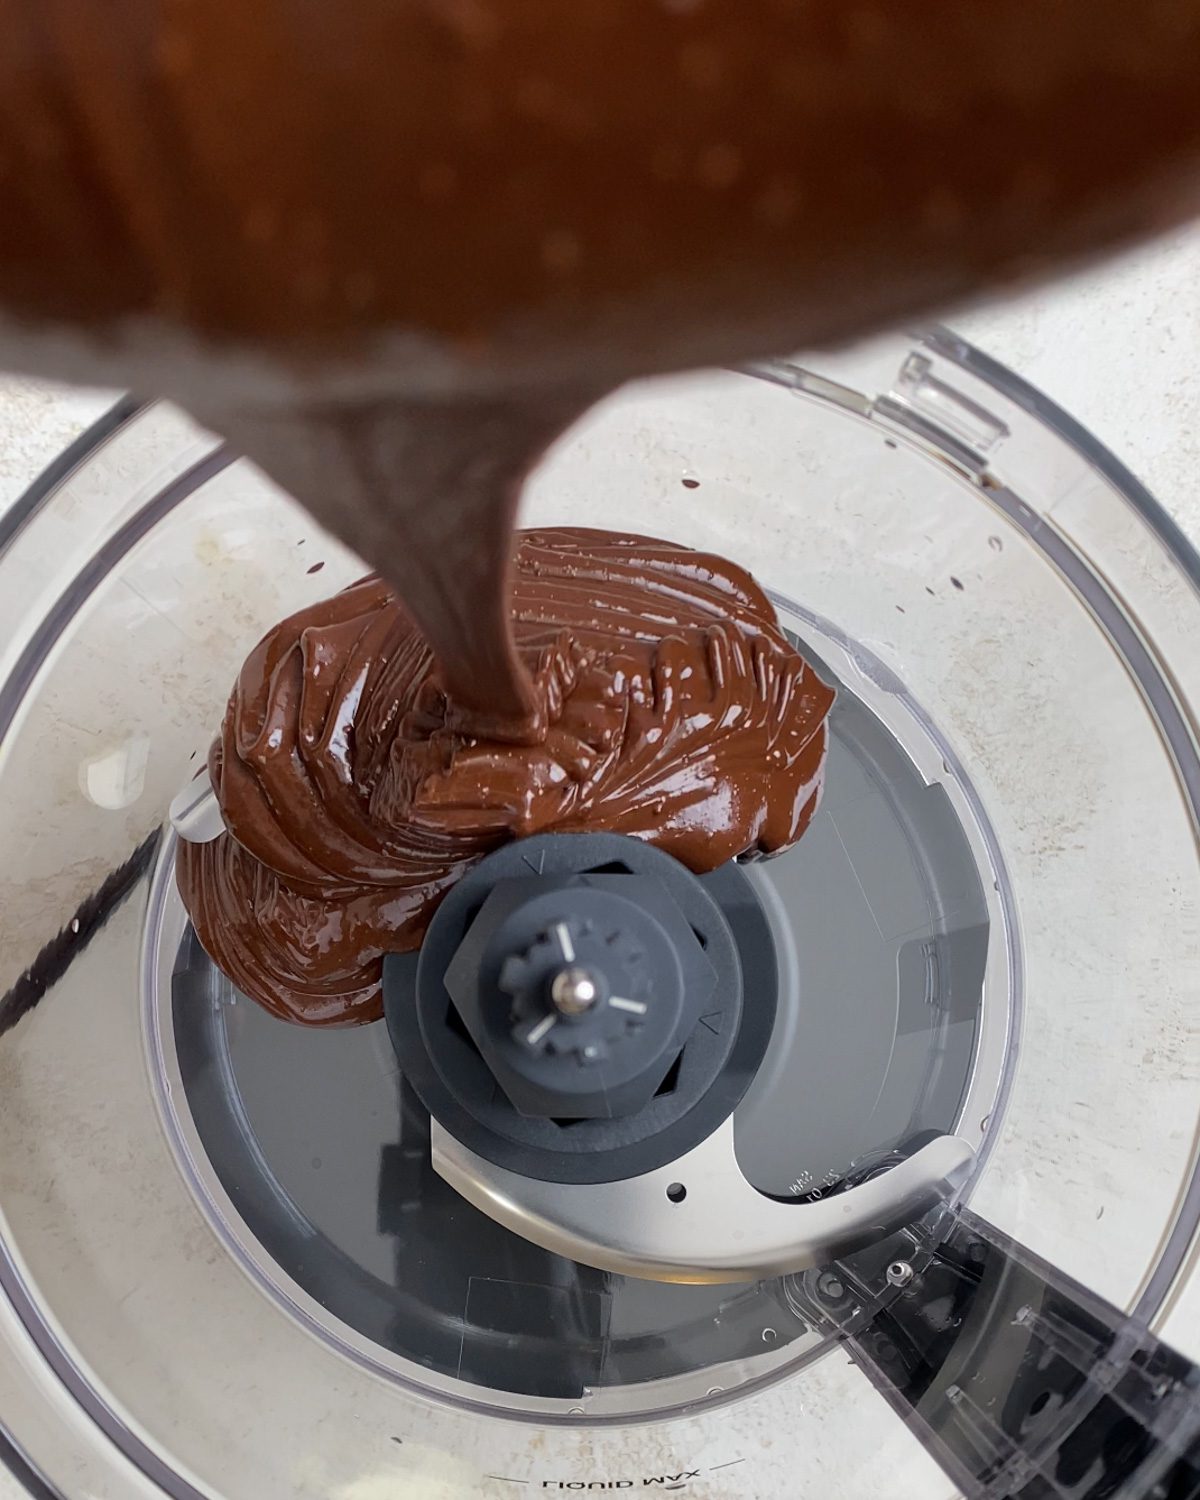 process shot of adding chocolate and peanut butter mixture to food processor